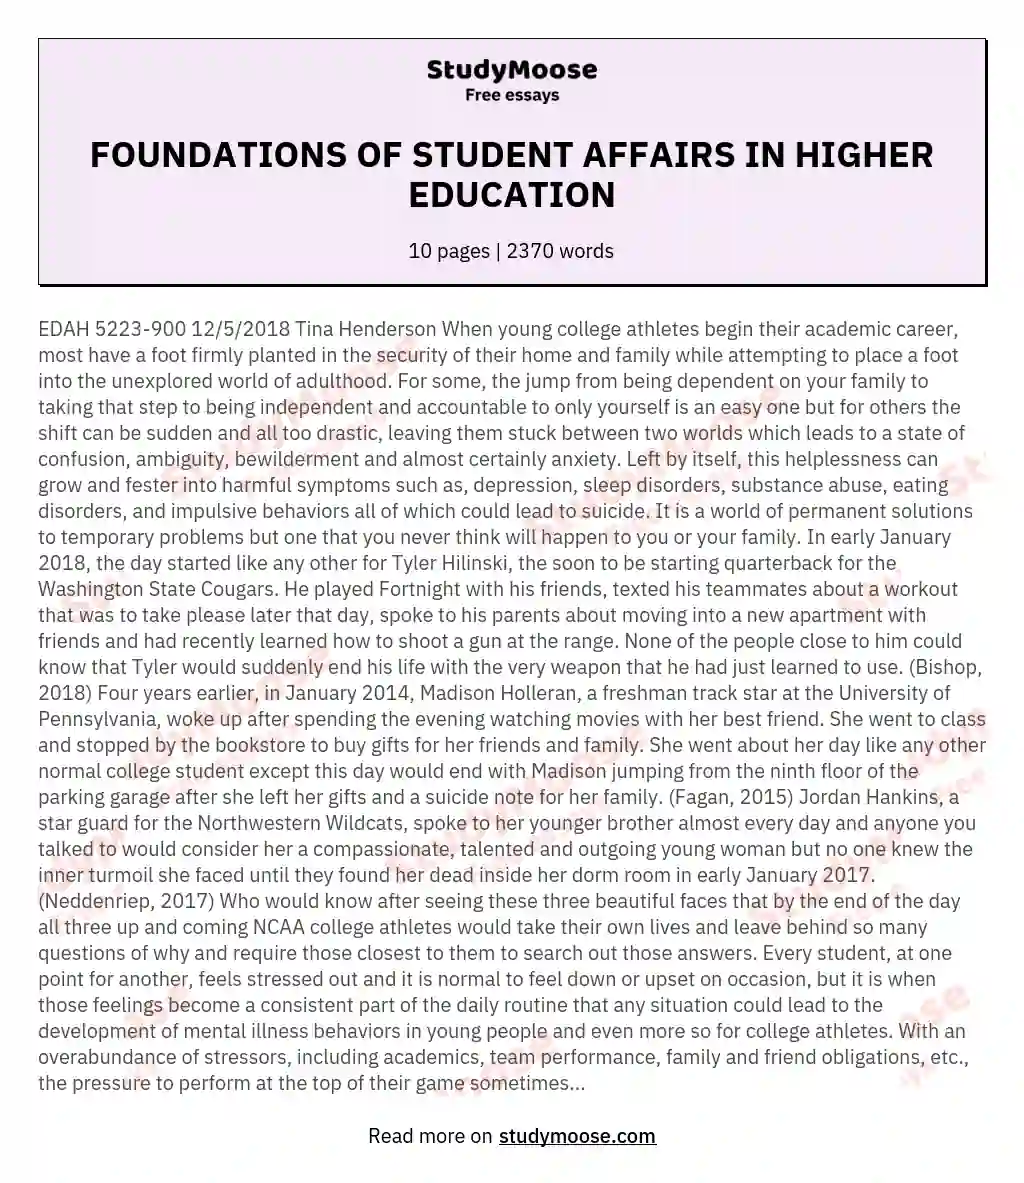 FOUNDATIONS OF STUDENT AFFAIRS IN HIGHER EDUCATION essay